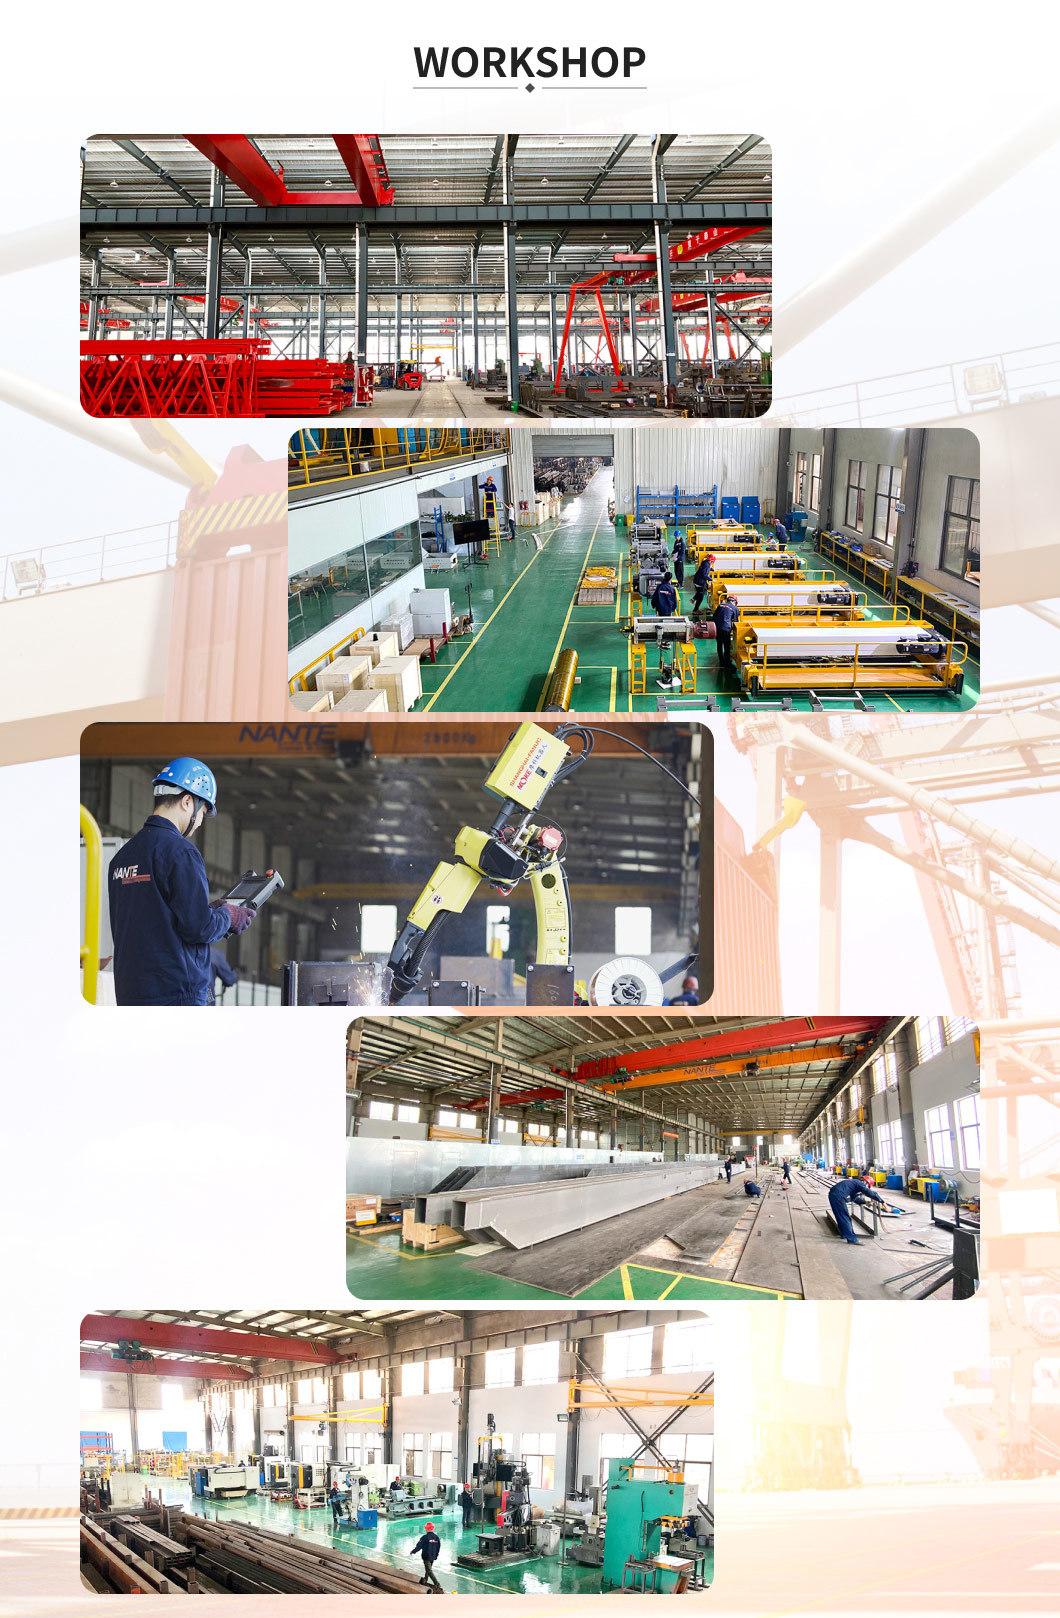 Double Girder Electric Overhead Traveling Cranes with Power-off Protection